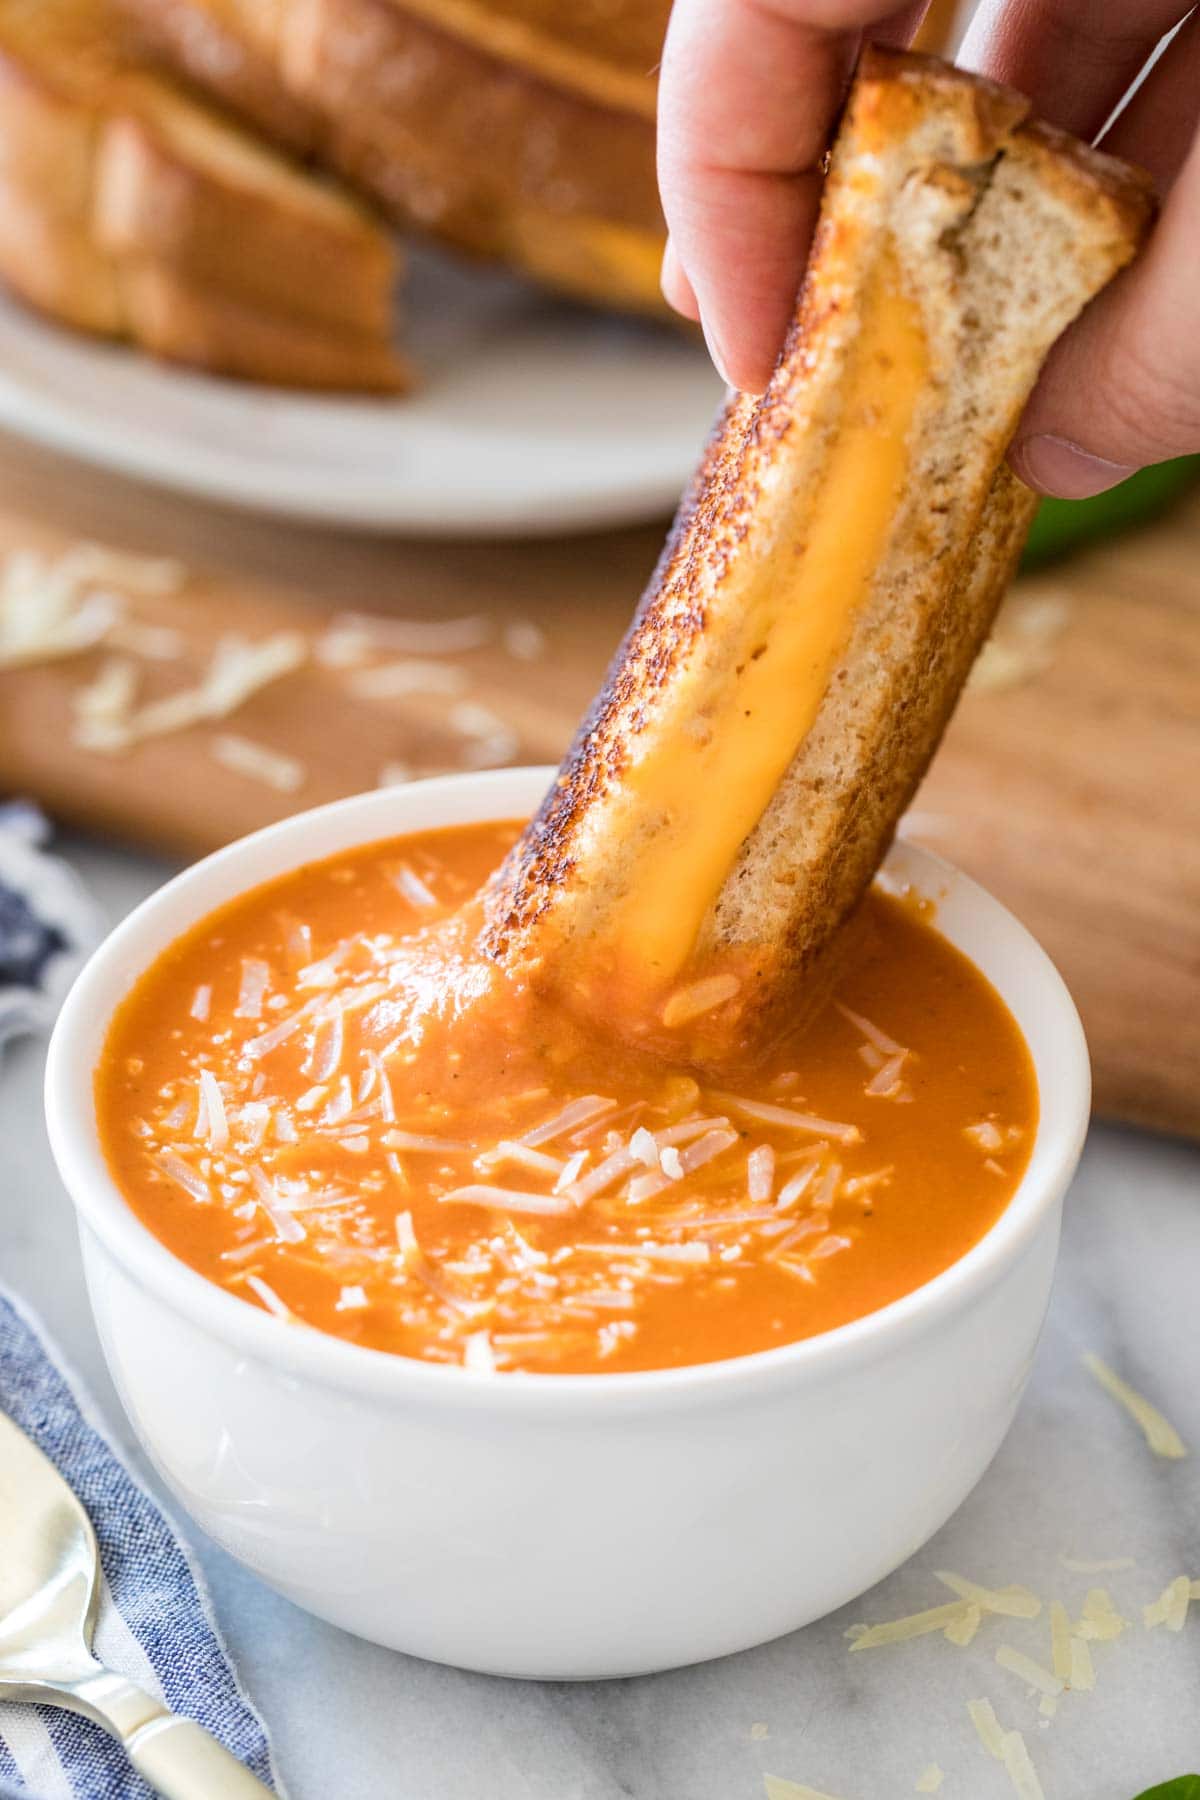 half of a grilled cheese sandwich being dipped into a bowl of tomato soup